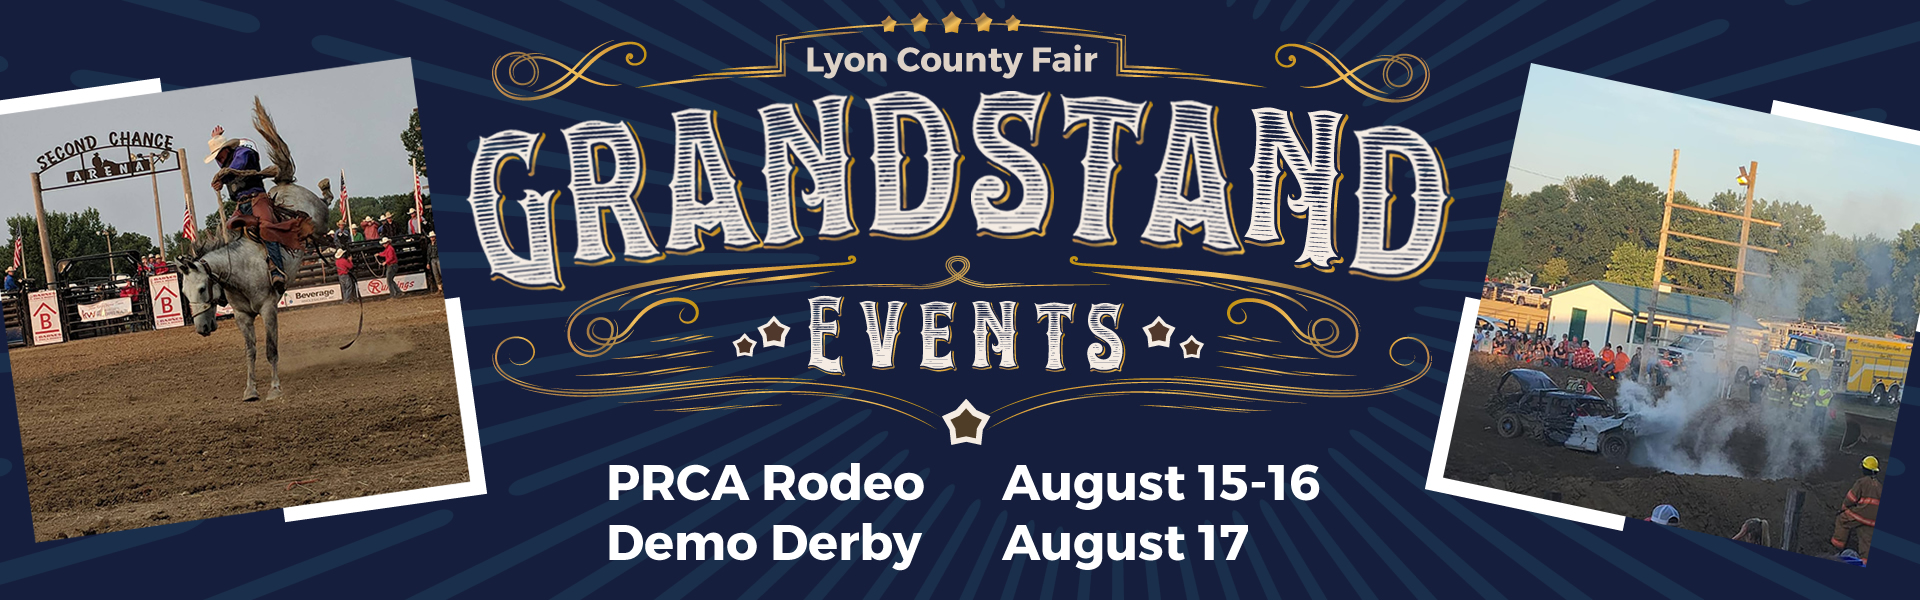 Lyon County Fair Grandstand Events - PRCA Rodeo on August 15-16 and Demolition Derby on August 17